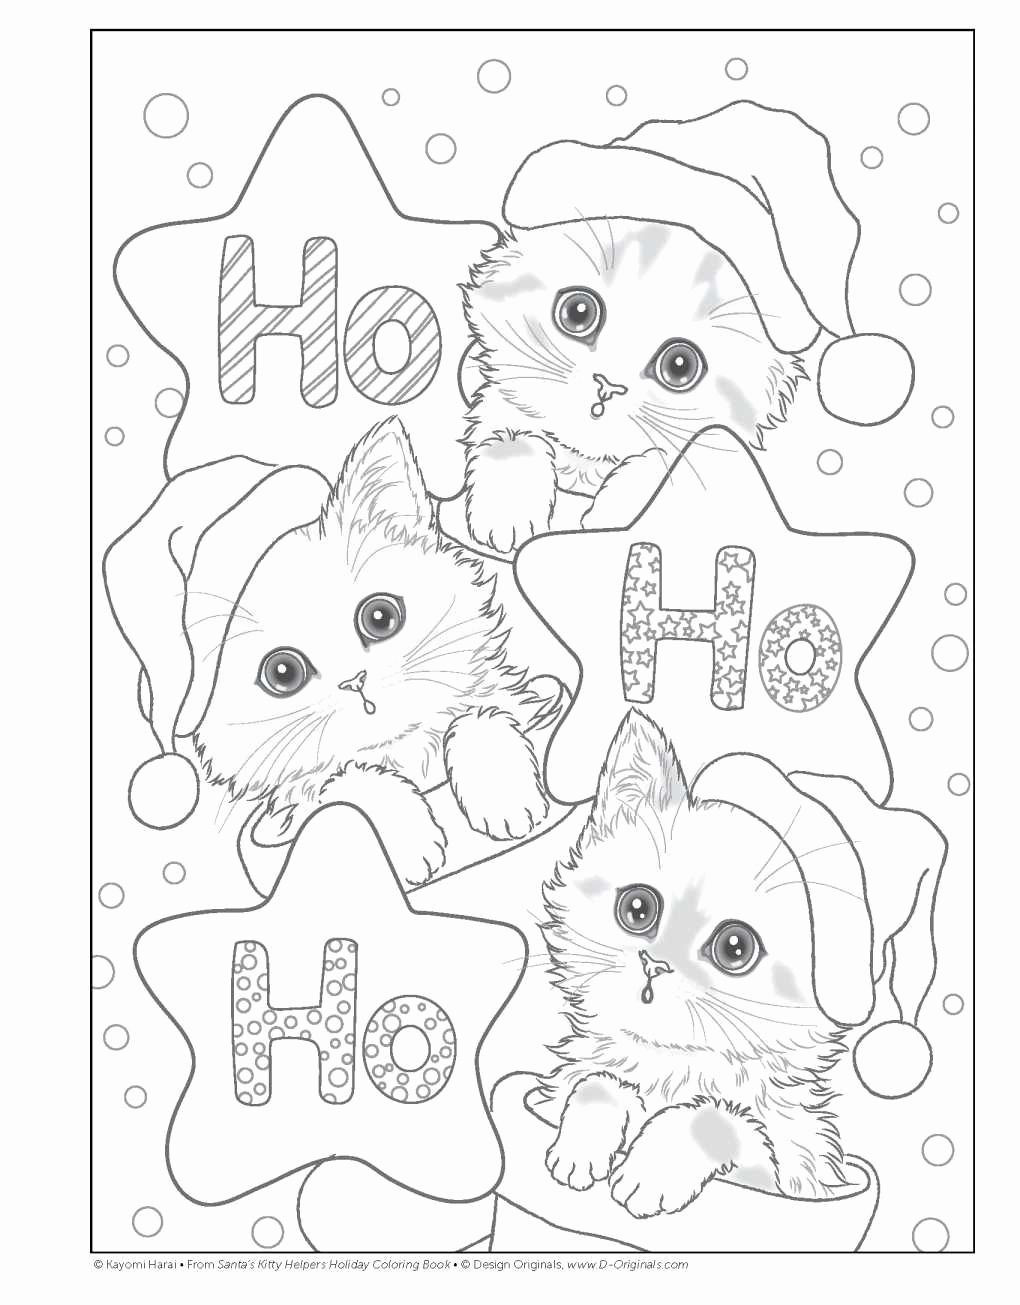 Download Preschool Kitten Coloring Pages - Coloring Home